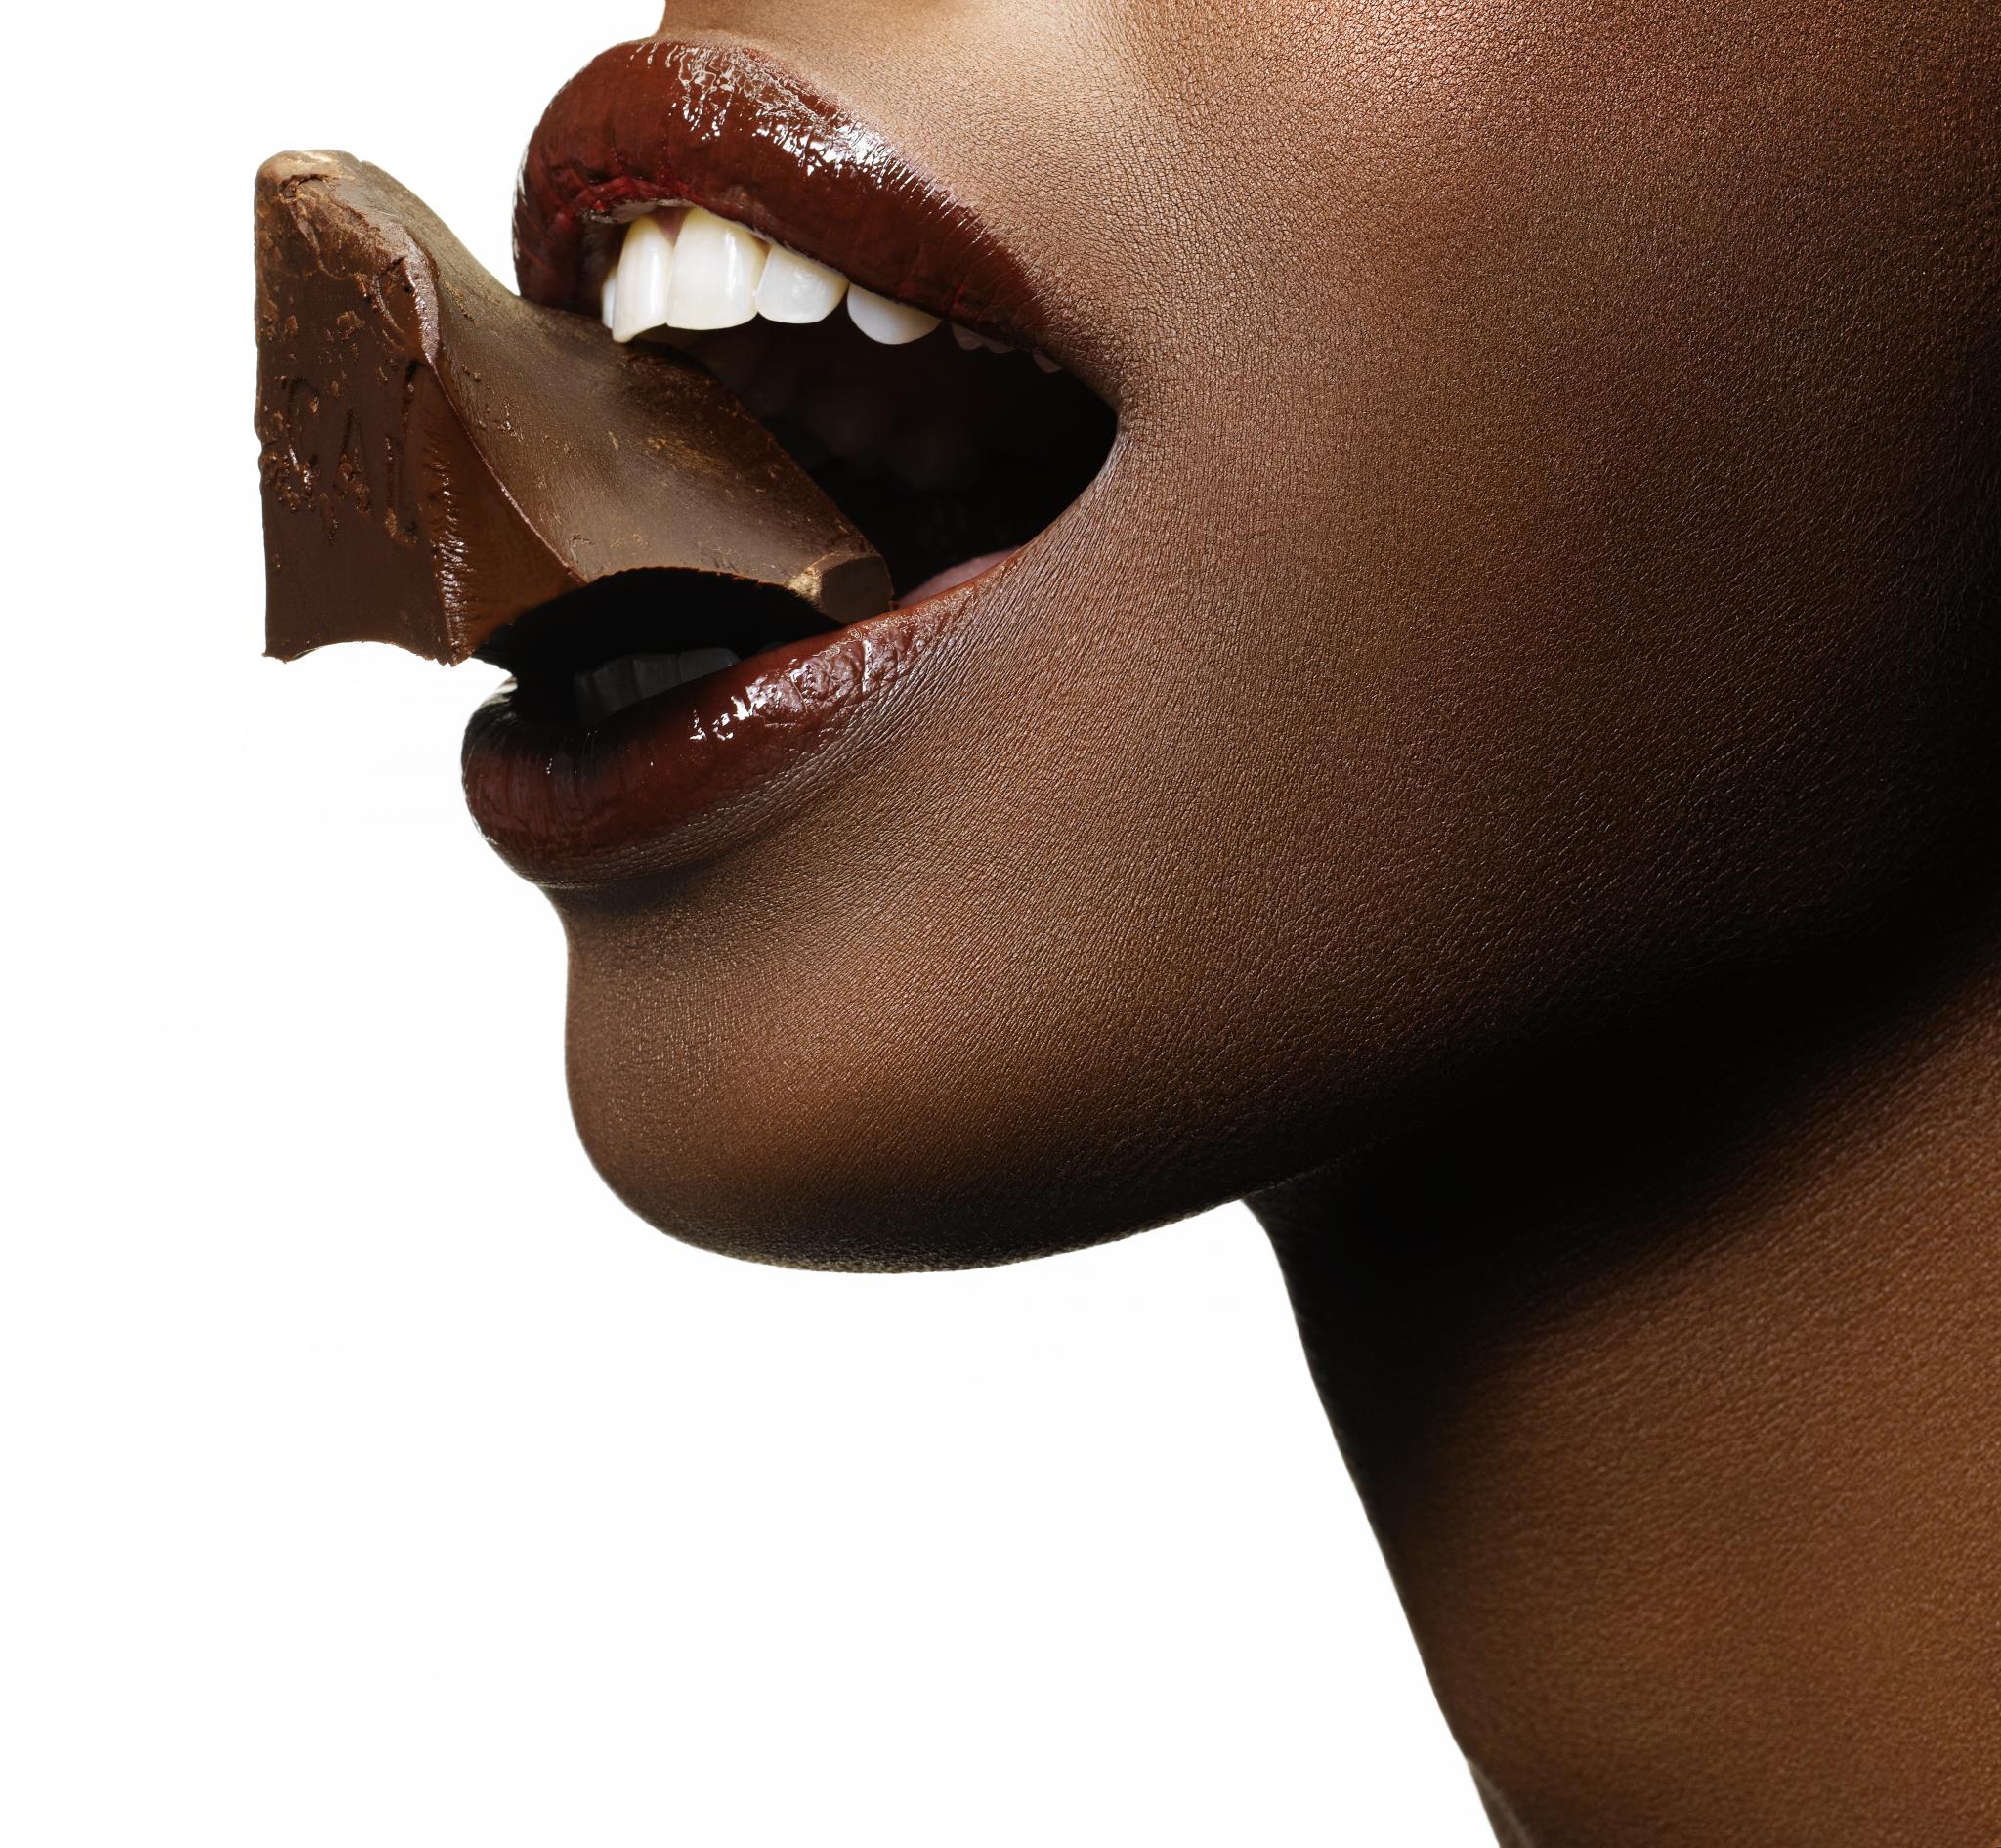 Your Chocolate Easter Bunny Could Give You a Beauty Boost